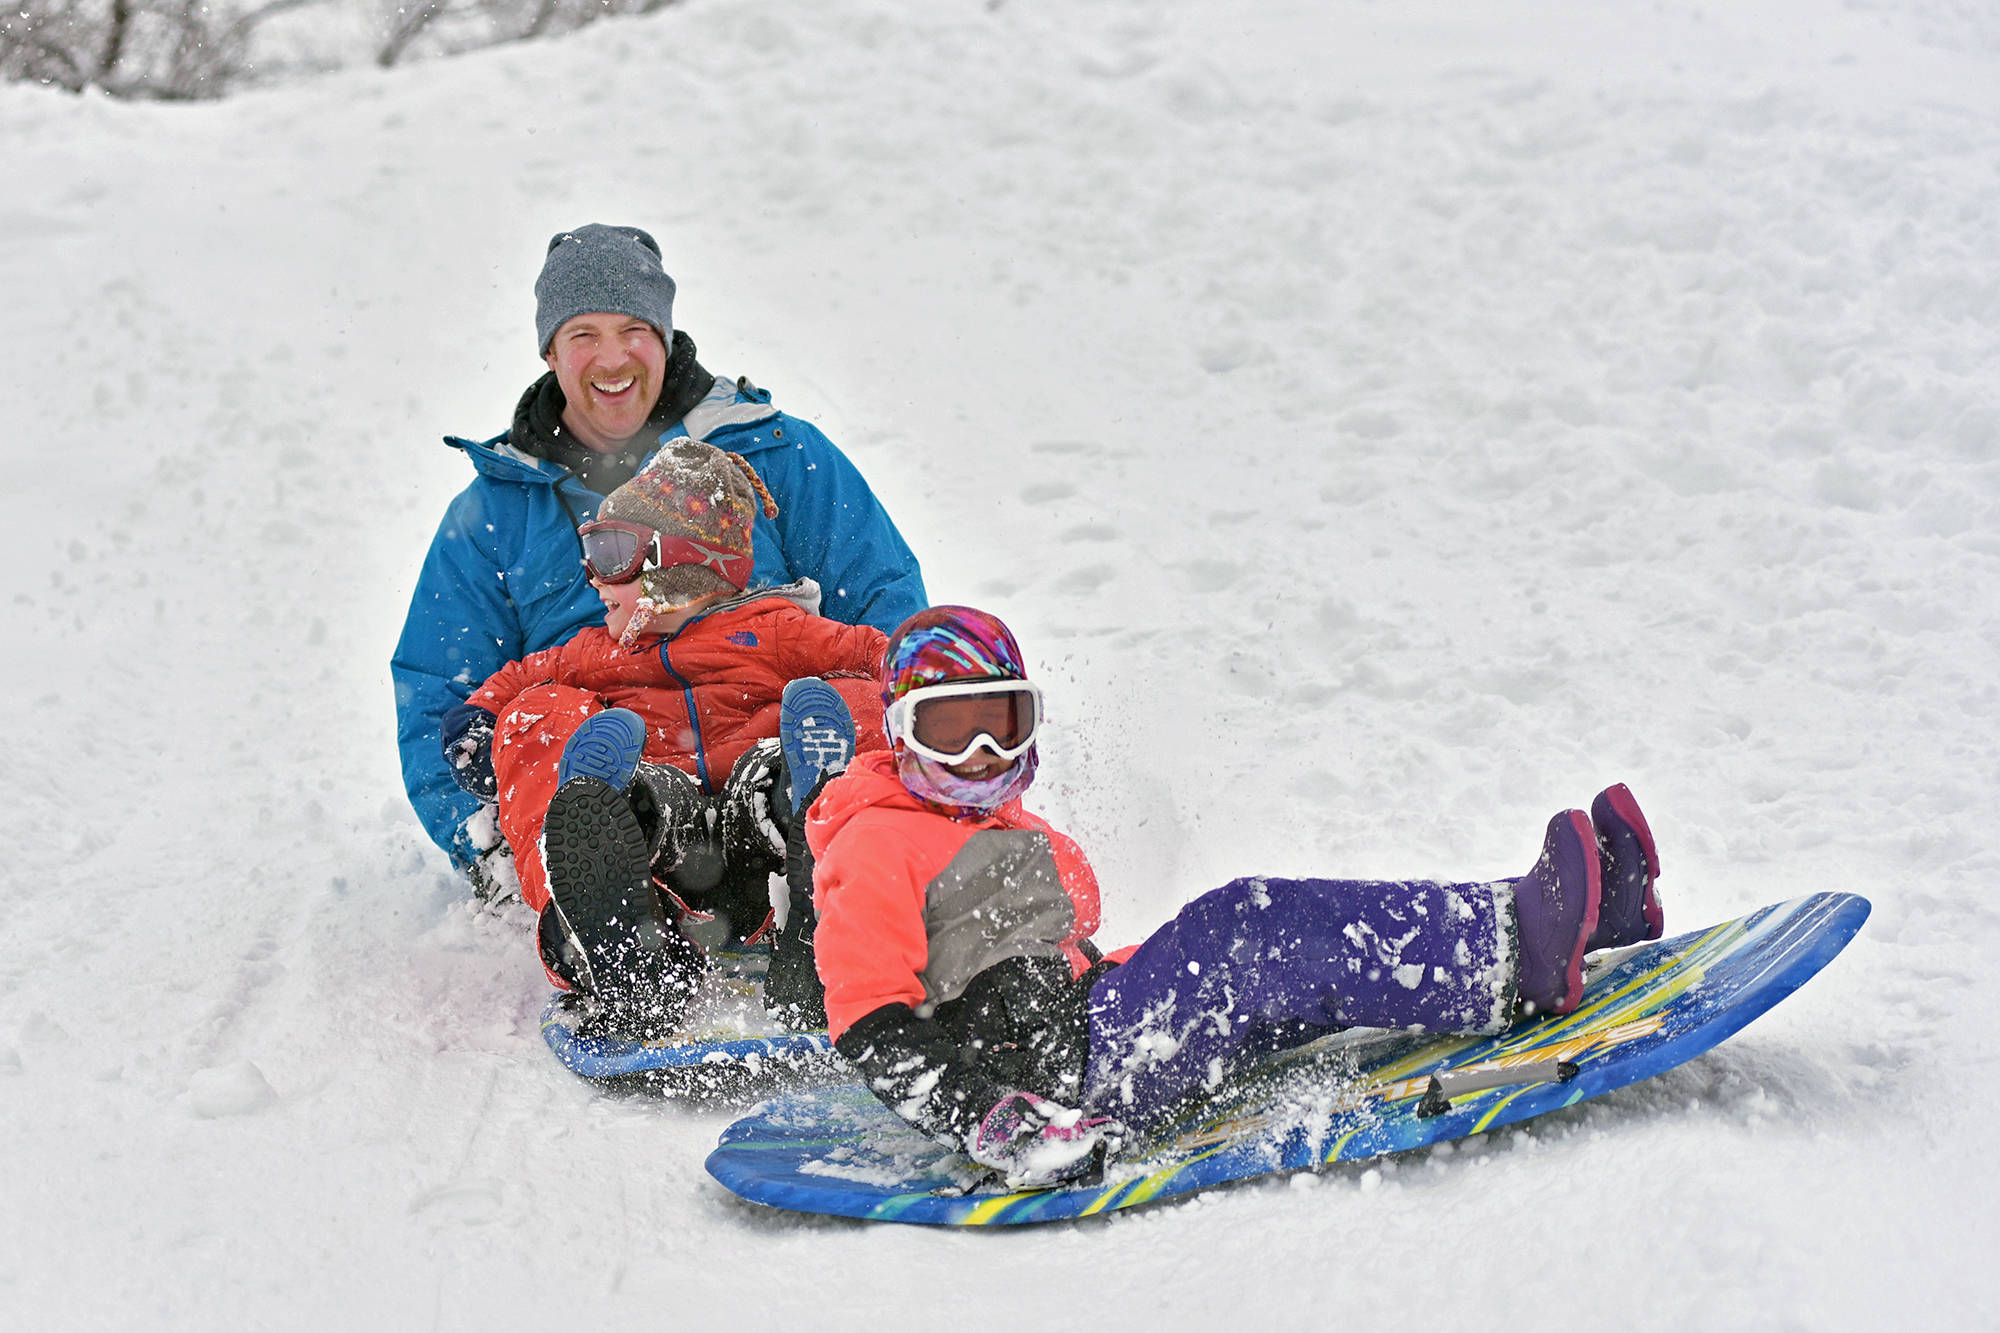 23754183_web1_copy_210101-SAA-FRONT-Marion-Bell-sledding_2